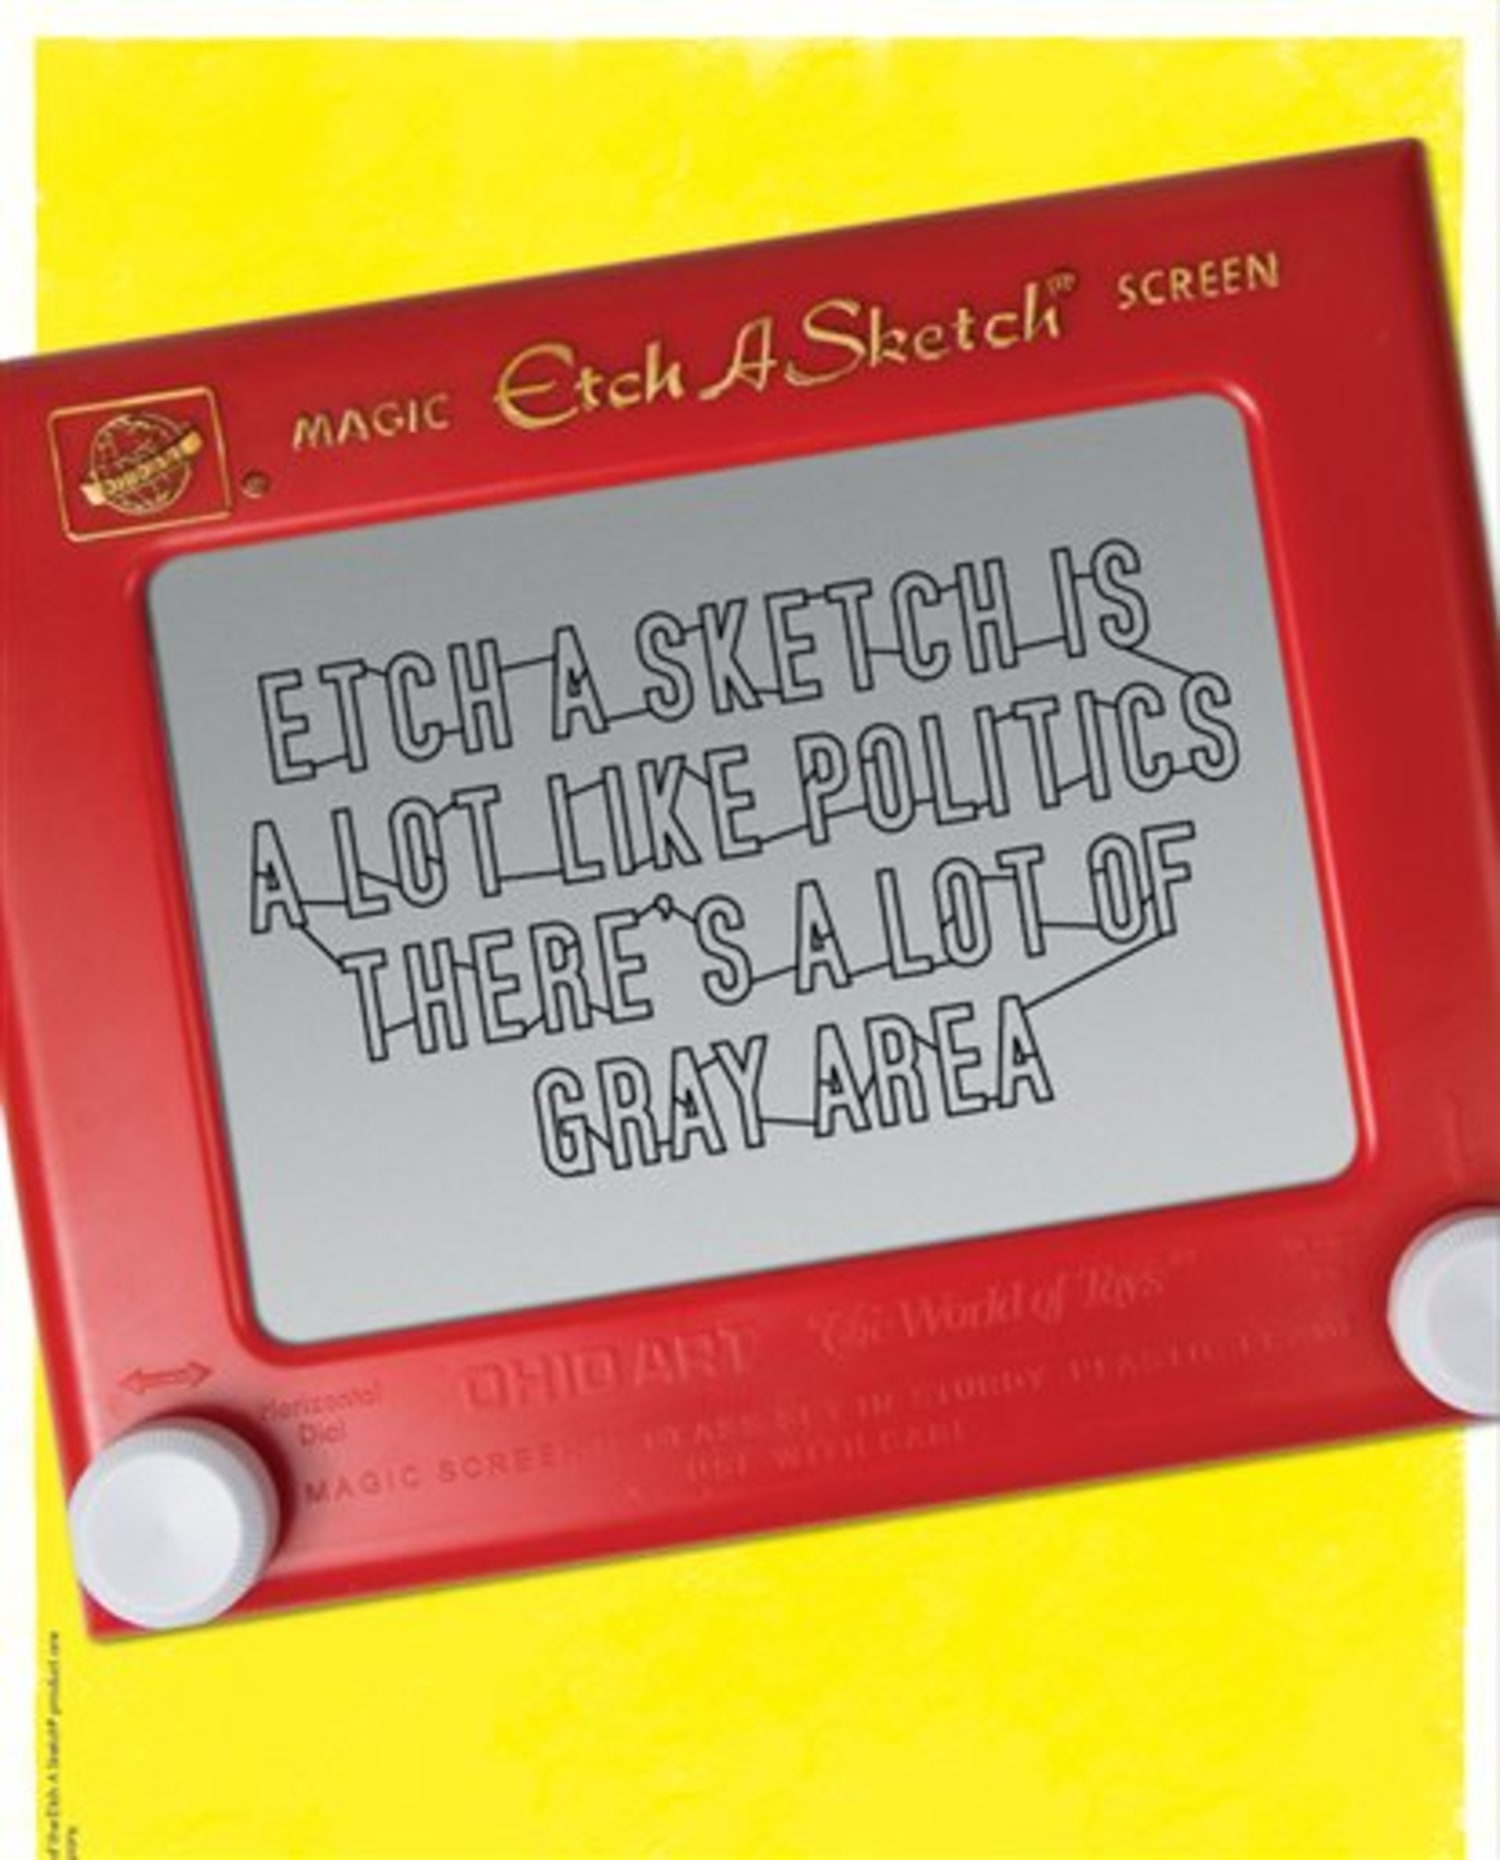 Local artist spreads Christmas cheer with Etch A Sketch drawings